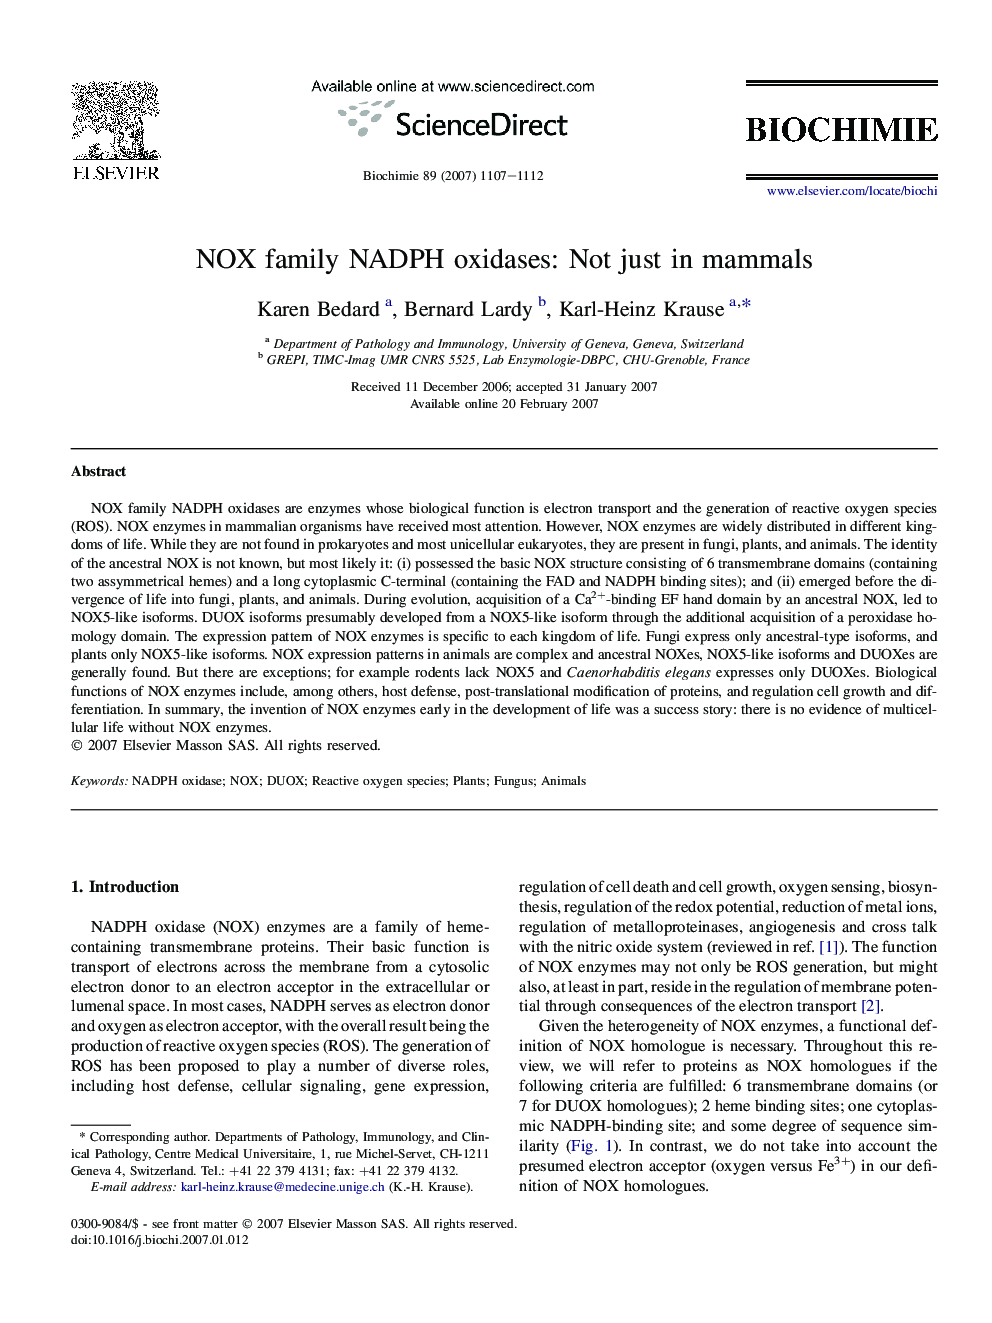 NOX family NADPH oxidases: Not just in mammals